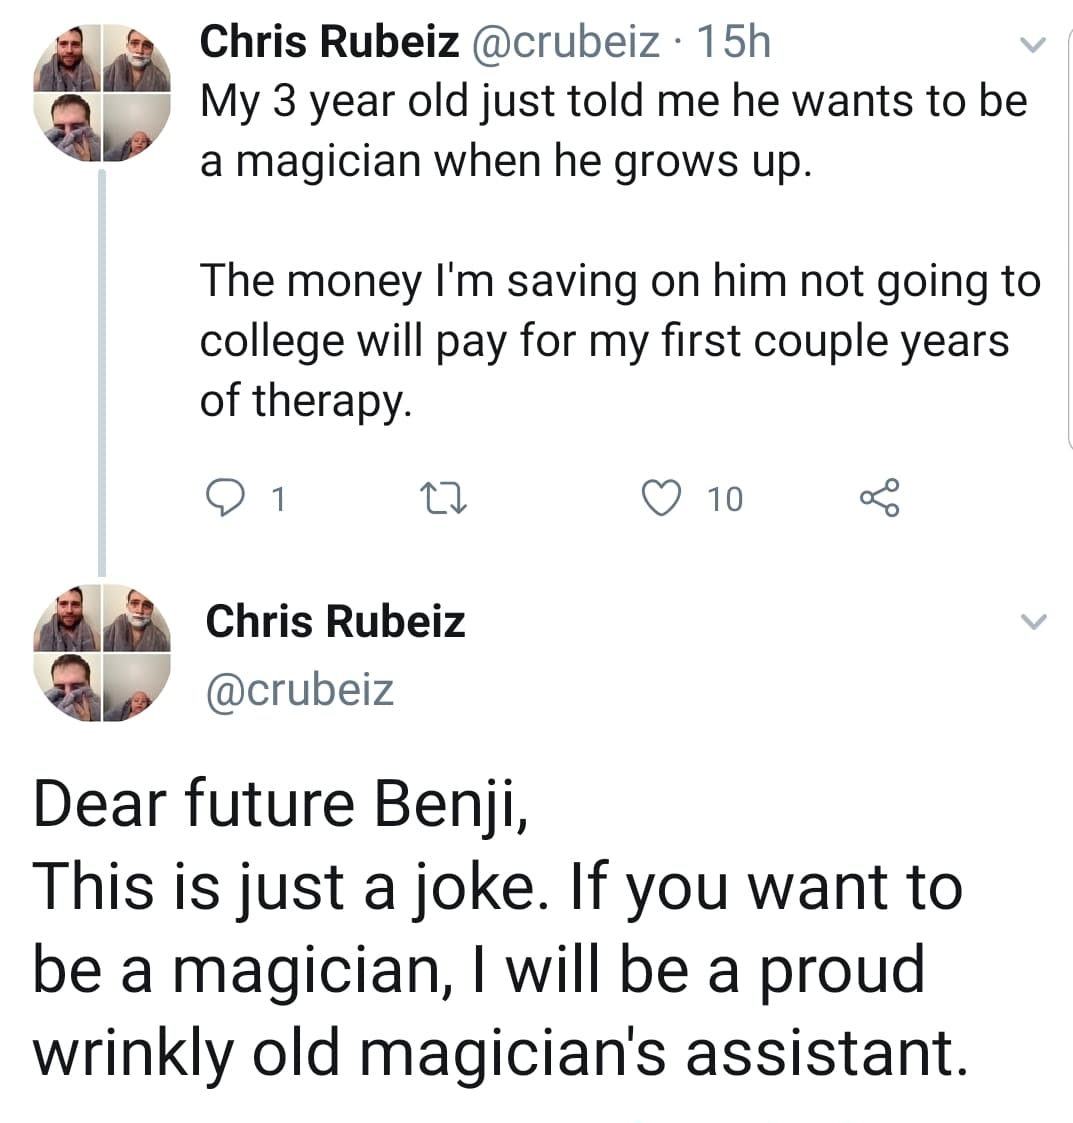 cute wholesome-memes cute text: Chris Rubeiz @crubeiz • 1 5h My 3 year old just told me he wants to be a magician when he grows up. The money I'm saving on him not going to college will pay for my first couple years of therapy. Chris Rubeiz @crubeiz Dear future Benji, 0 10 This is just a joke. If you want to be a magician, I will be a proud wrinkly old magician's assistant. 